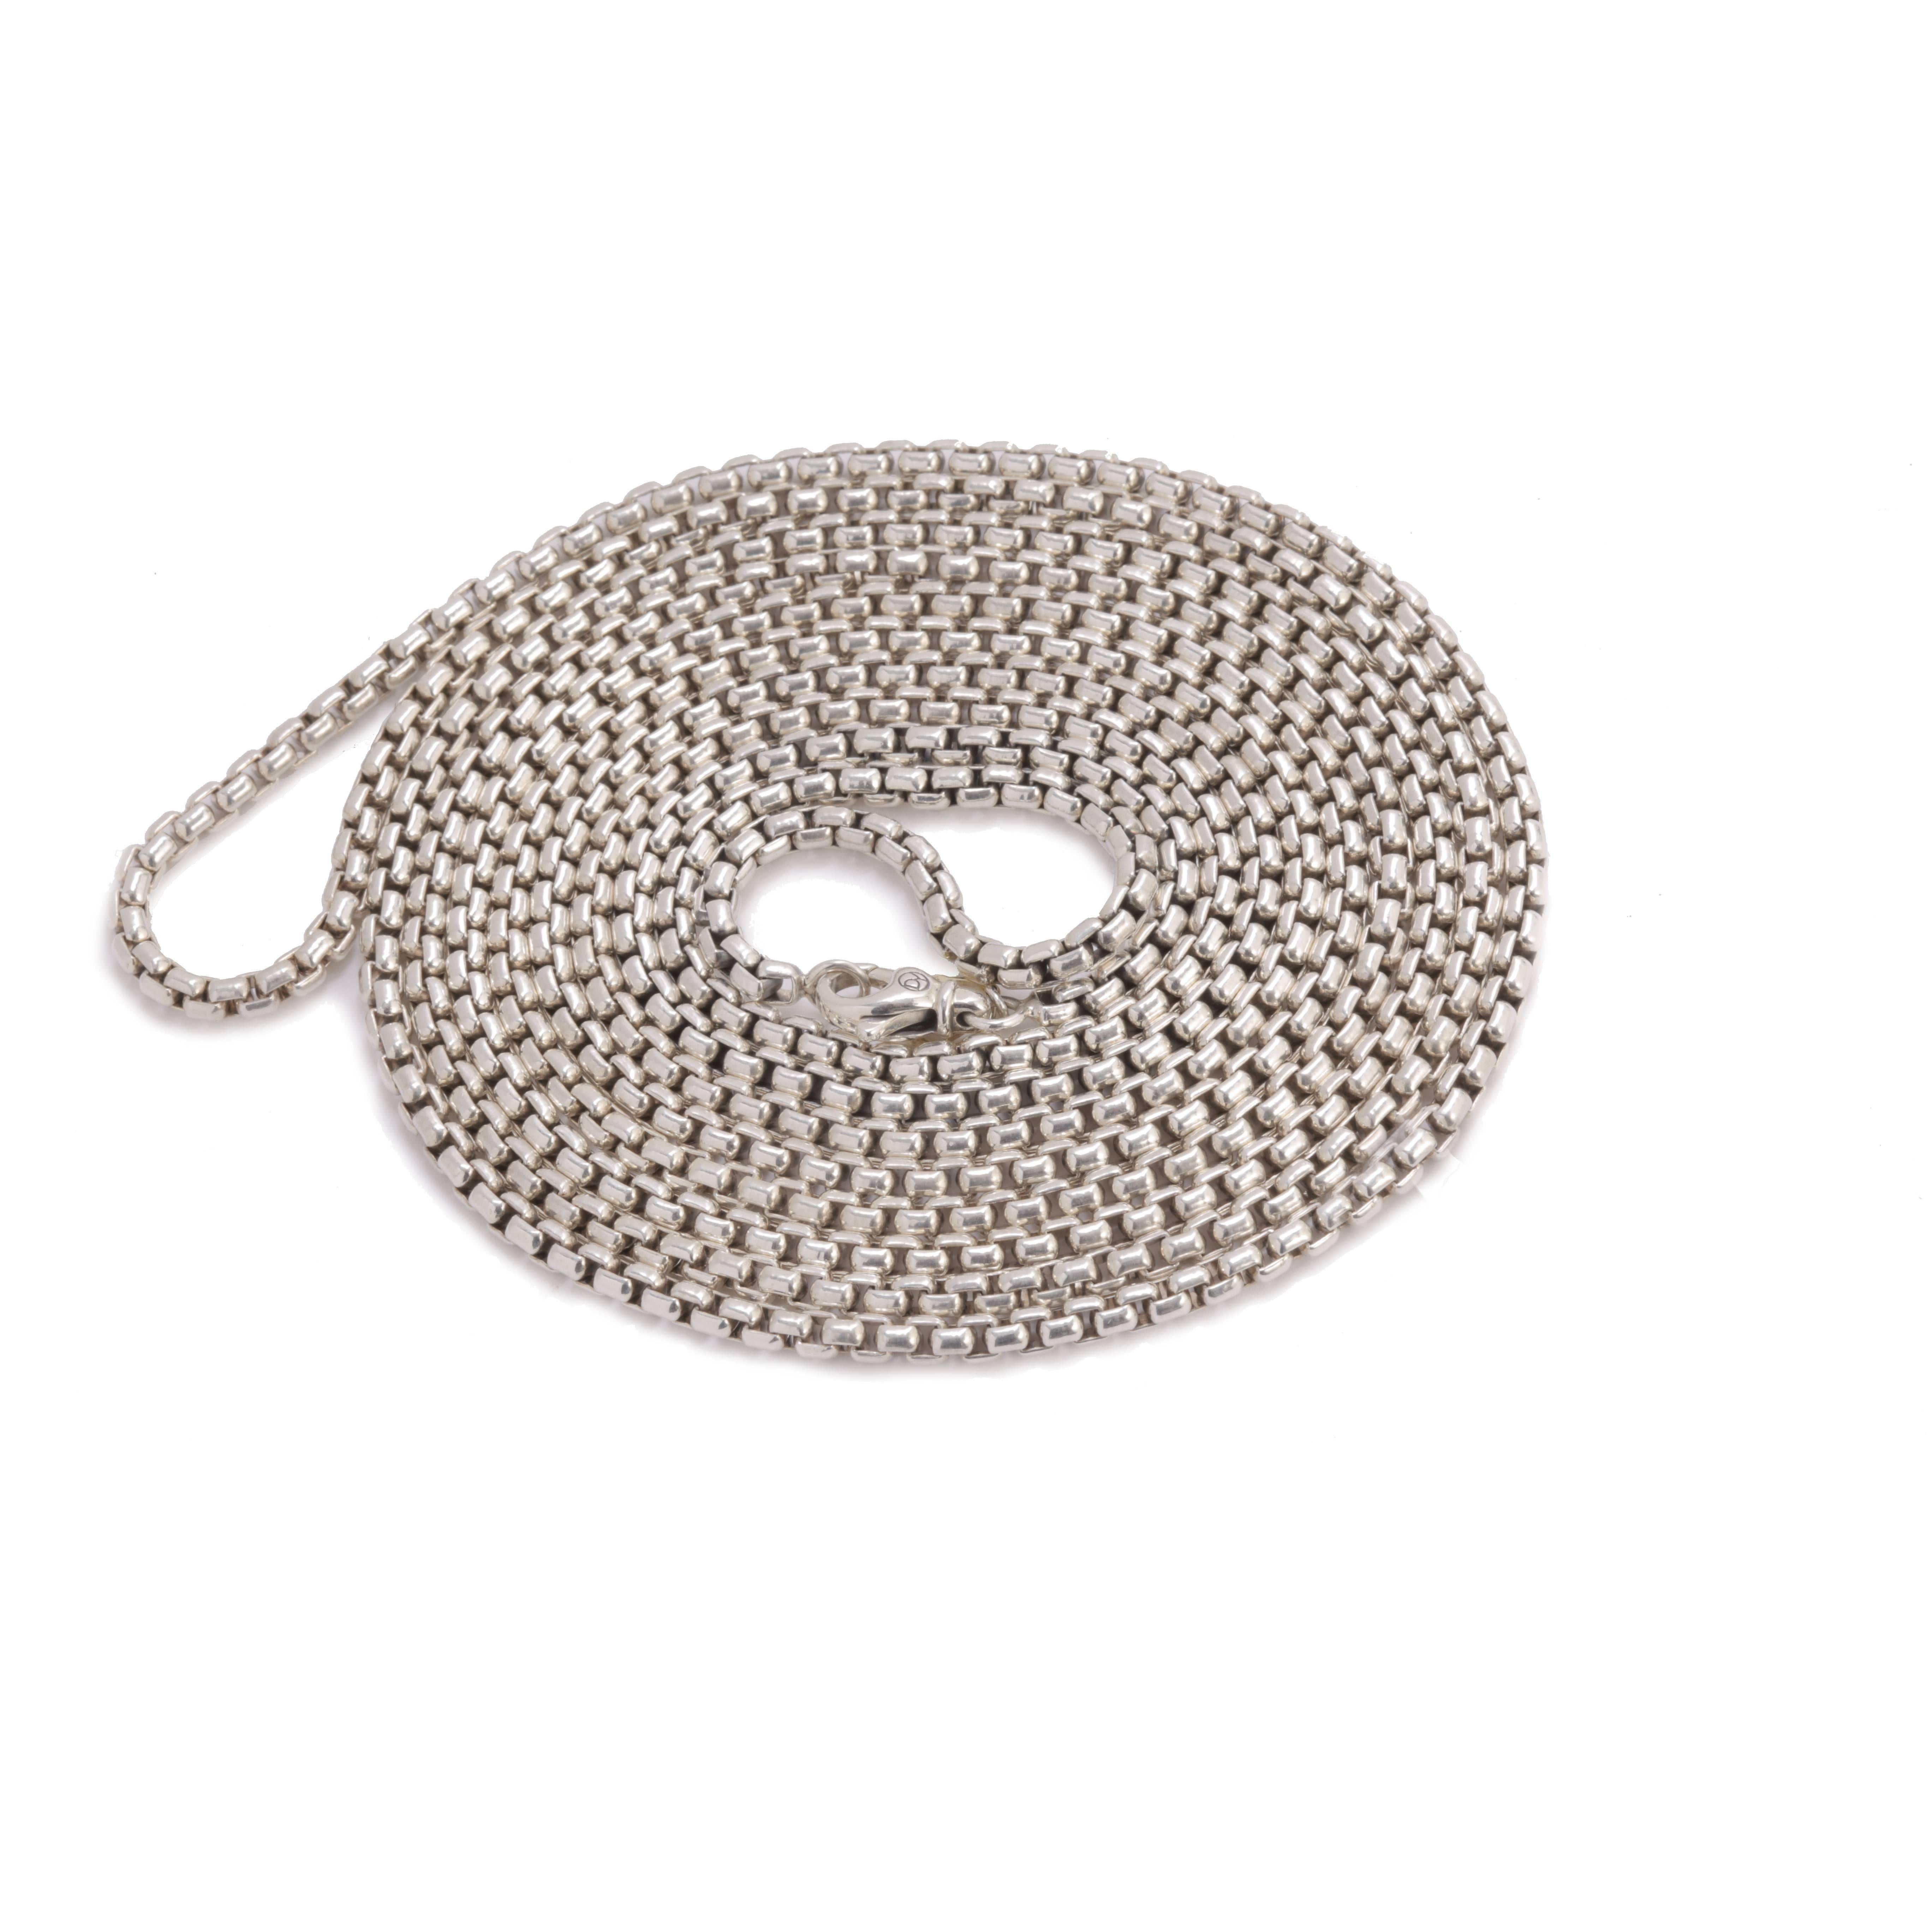 Previously loved sterling Silver David Yurman long box chain necklace measuring 72 inches featuring a lobster clasp closure.


